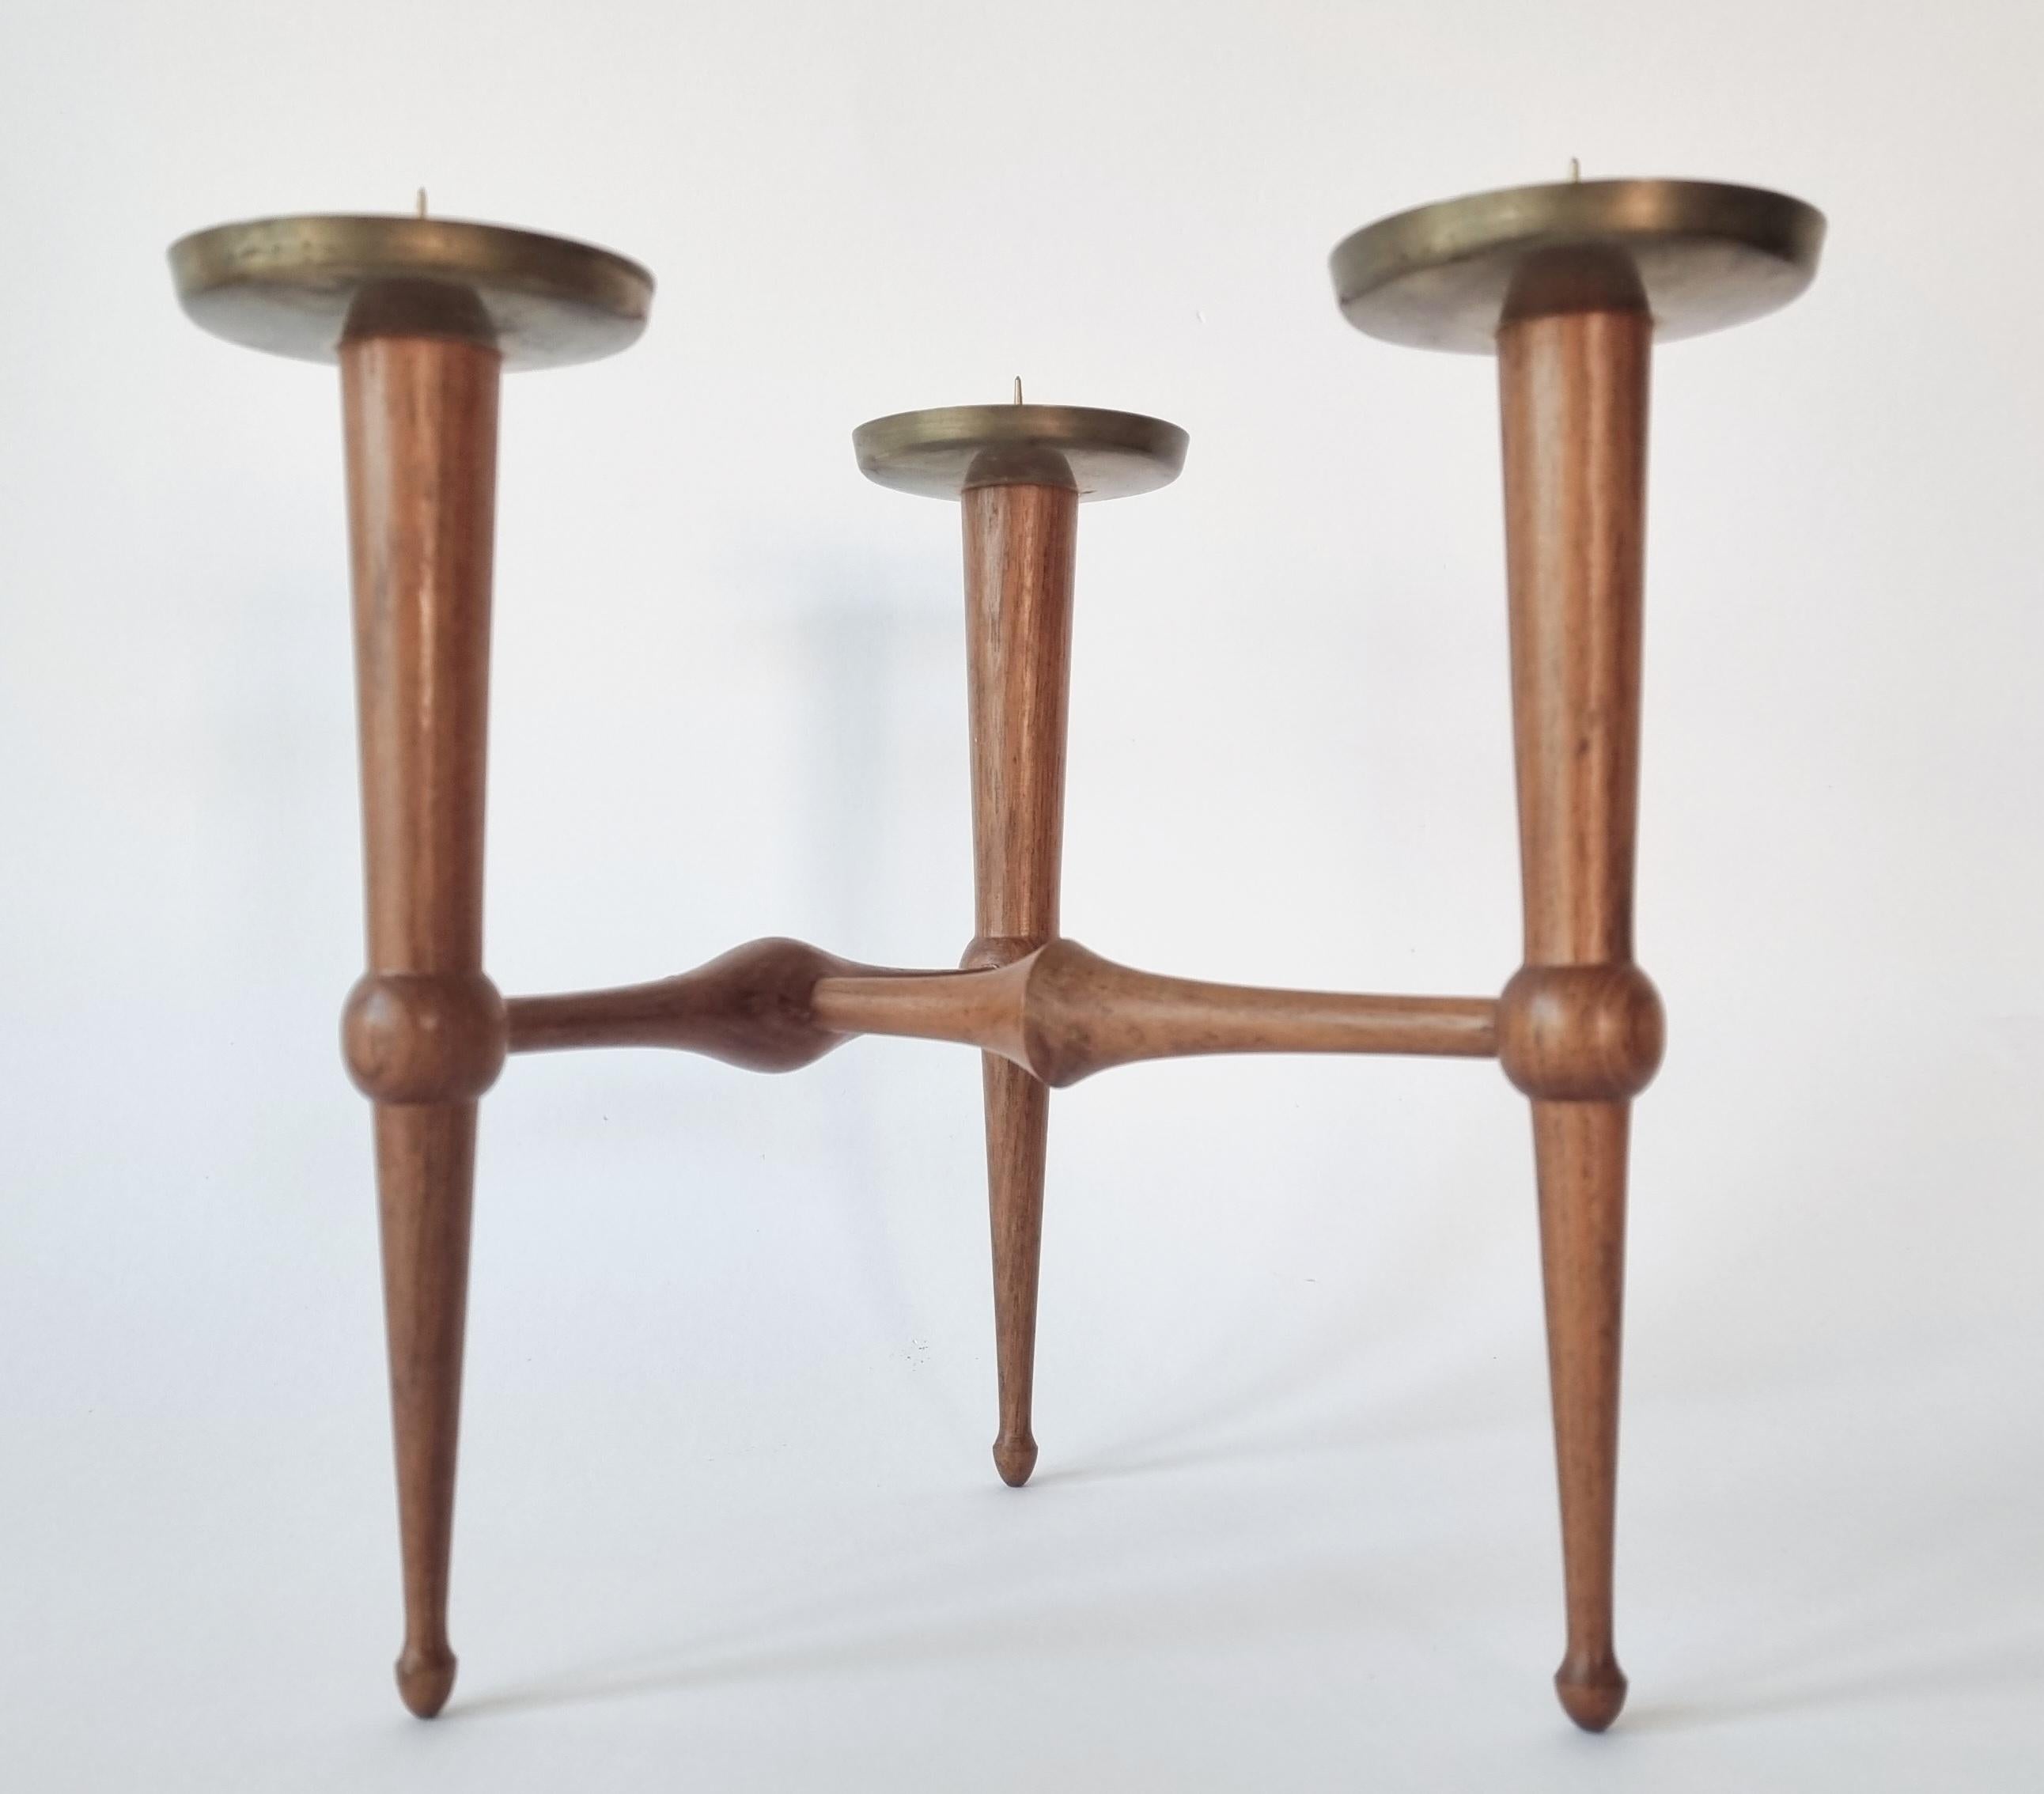 Midcentury Teak and Brass Rare Table Candle Holder / Stick, Denmark, 1960s For Sale 8